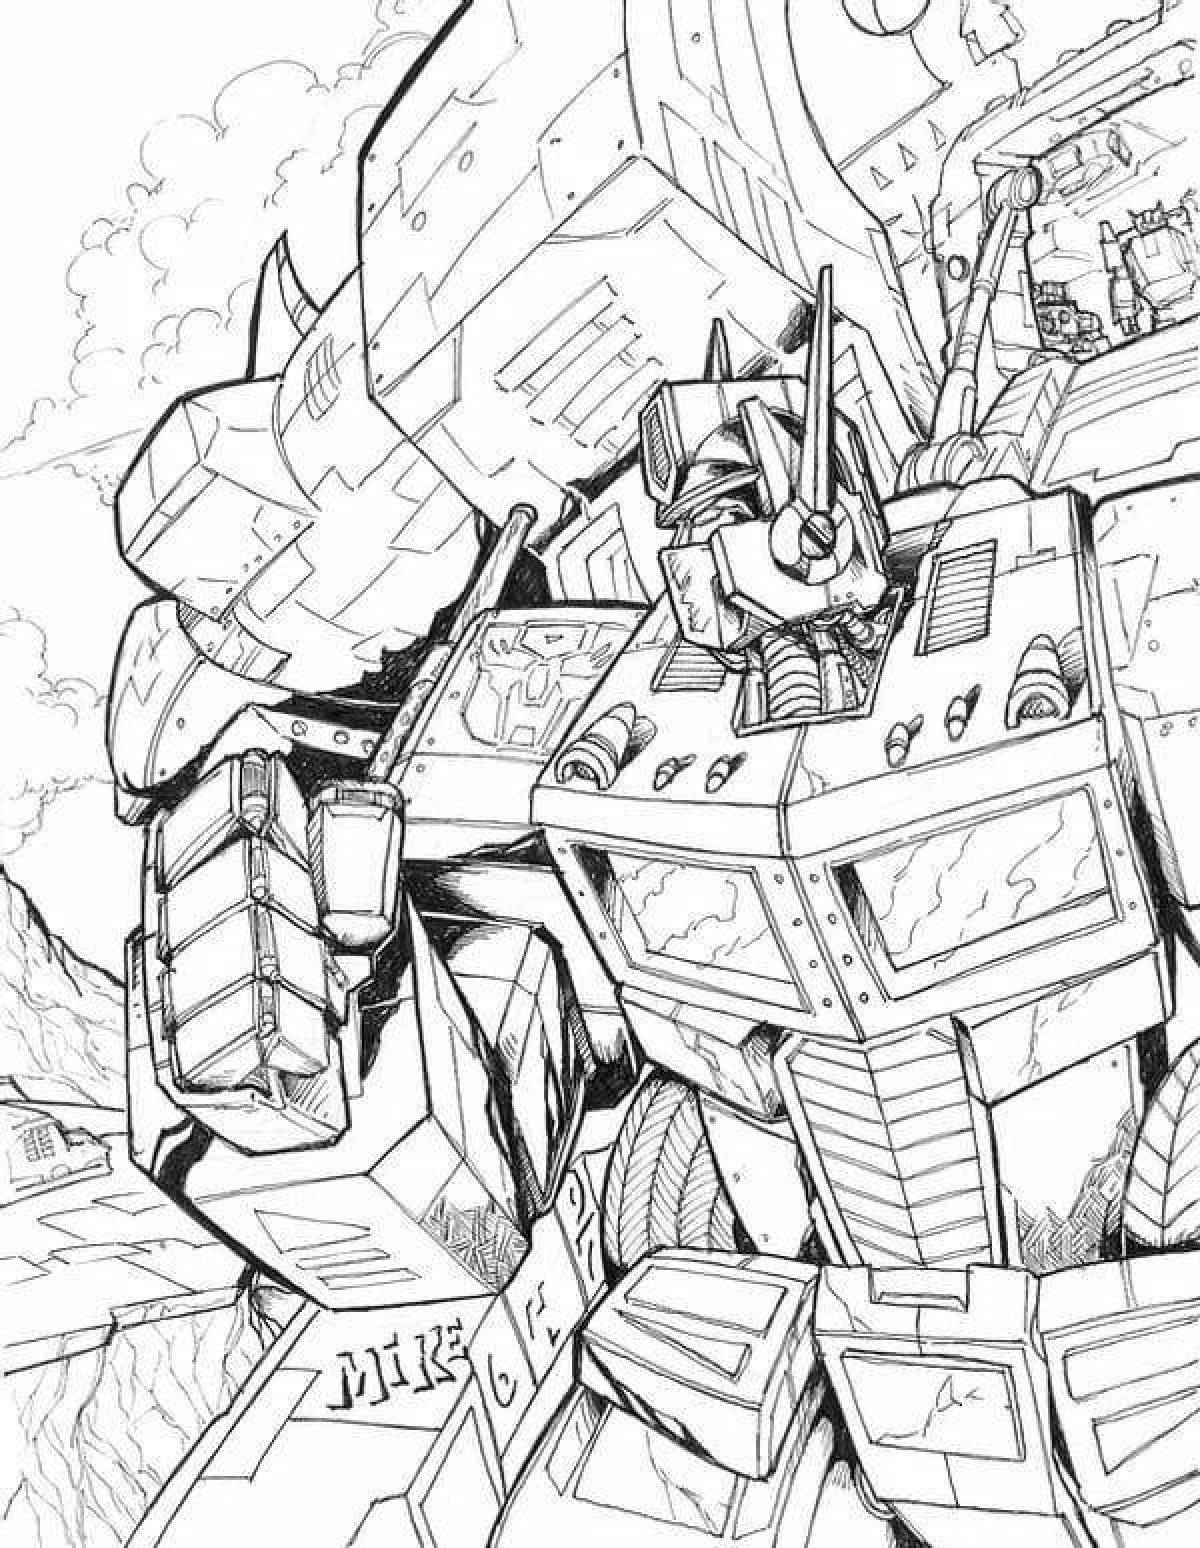 Awesome optimus prime coloring page